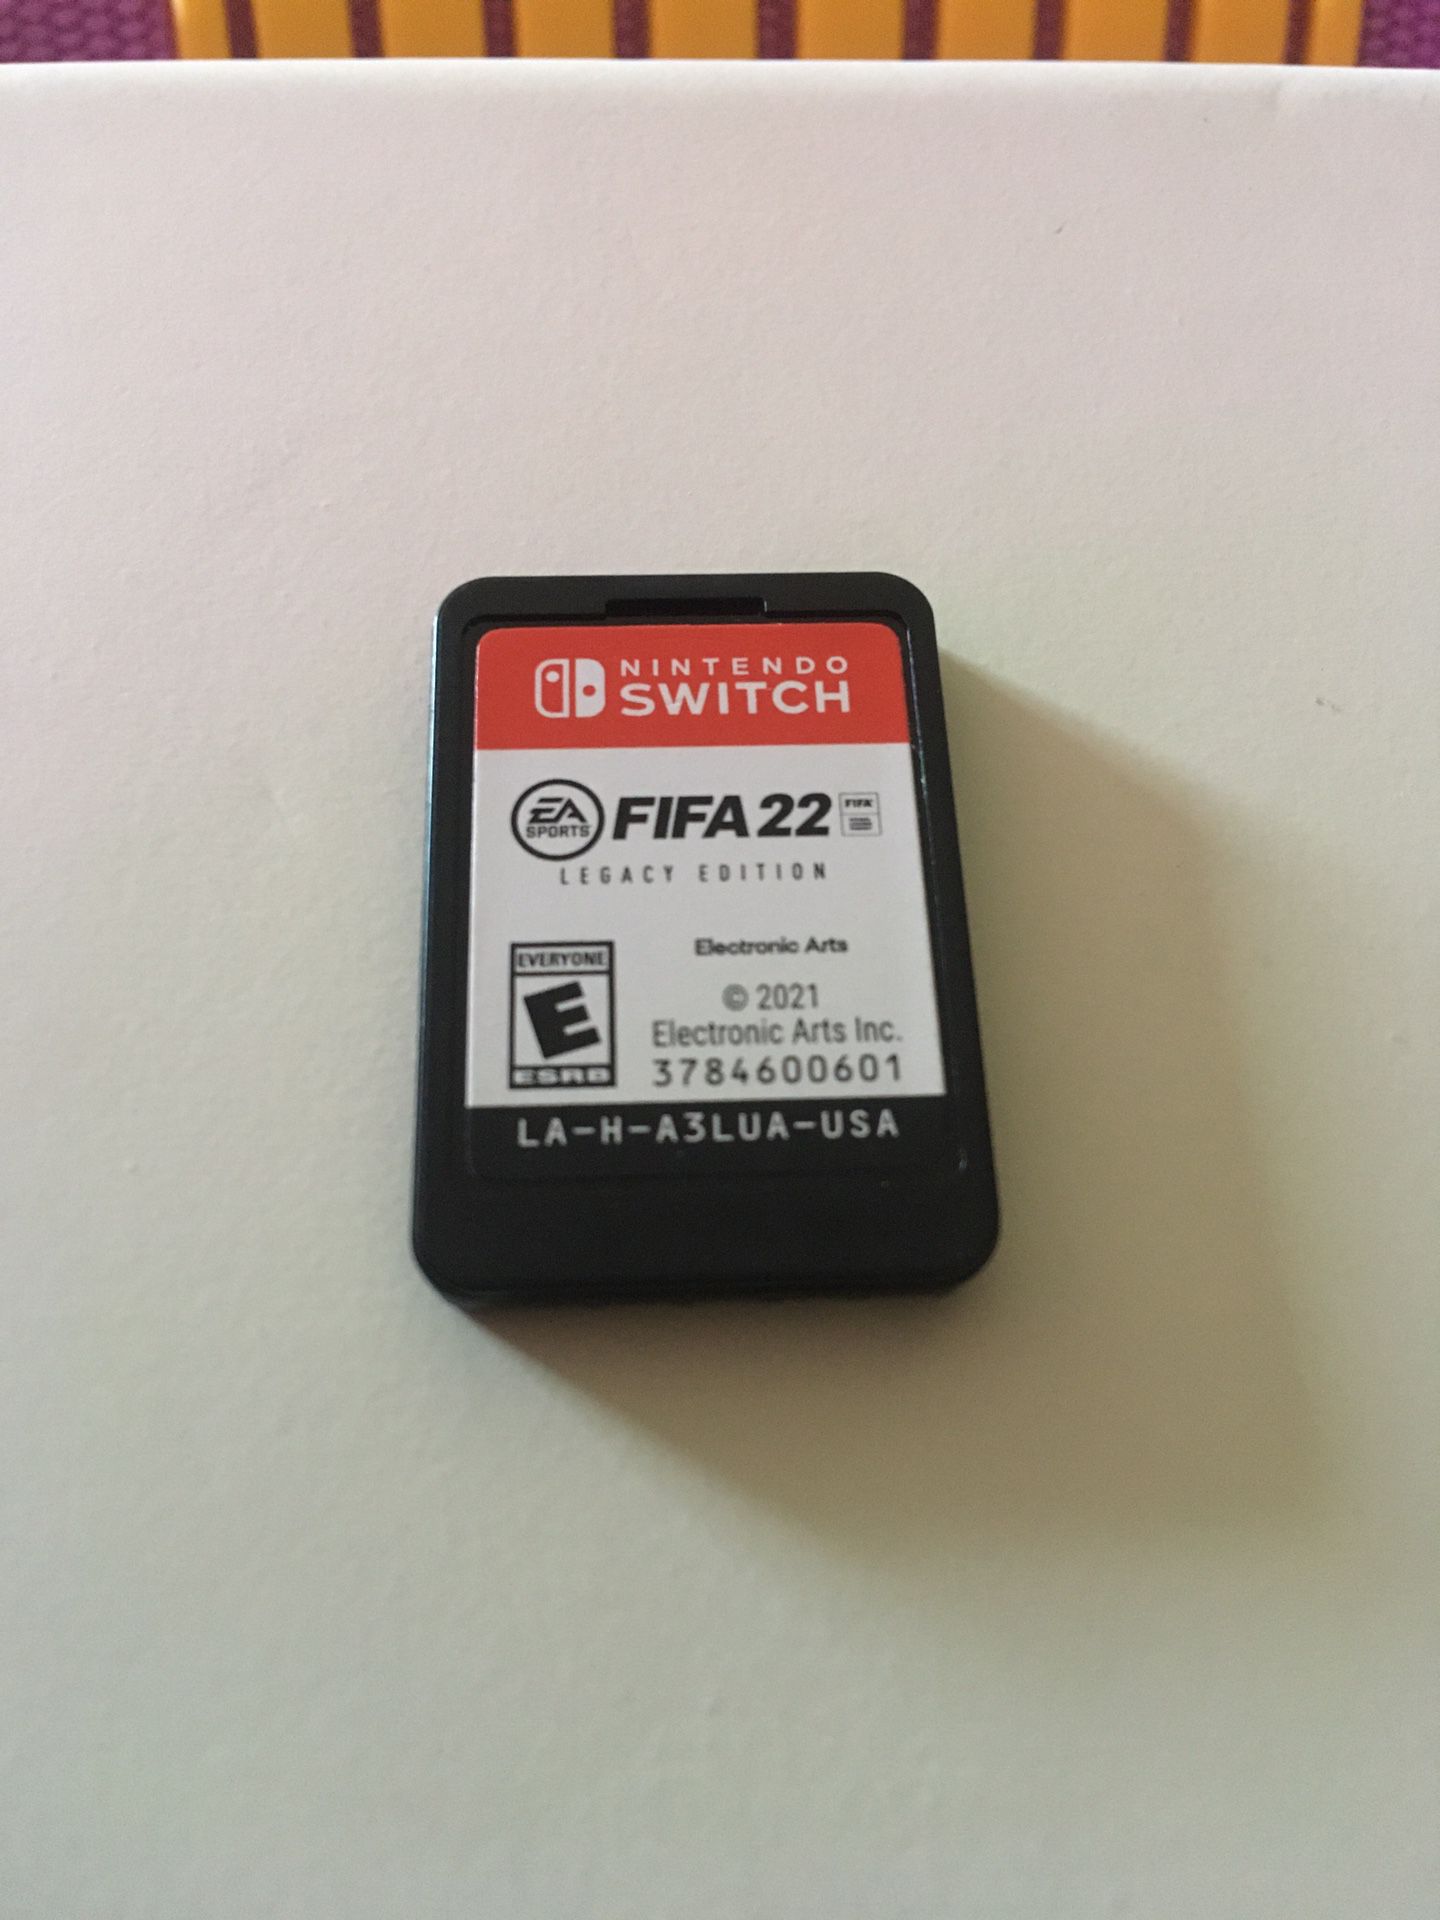 Sale OfferUp EDITION (NINTENDO SWITCH) in LEGACY 22 Gainesville, - FL FIFA for